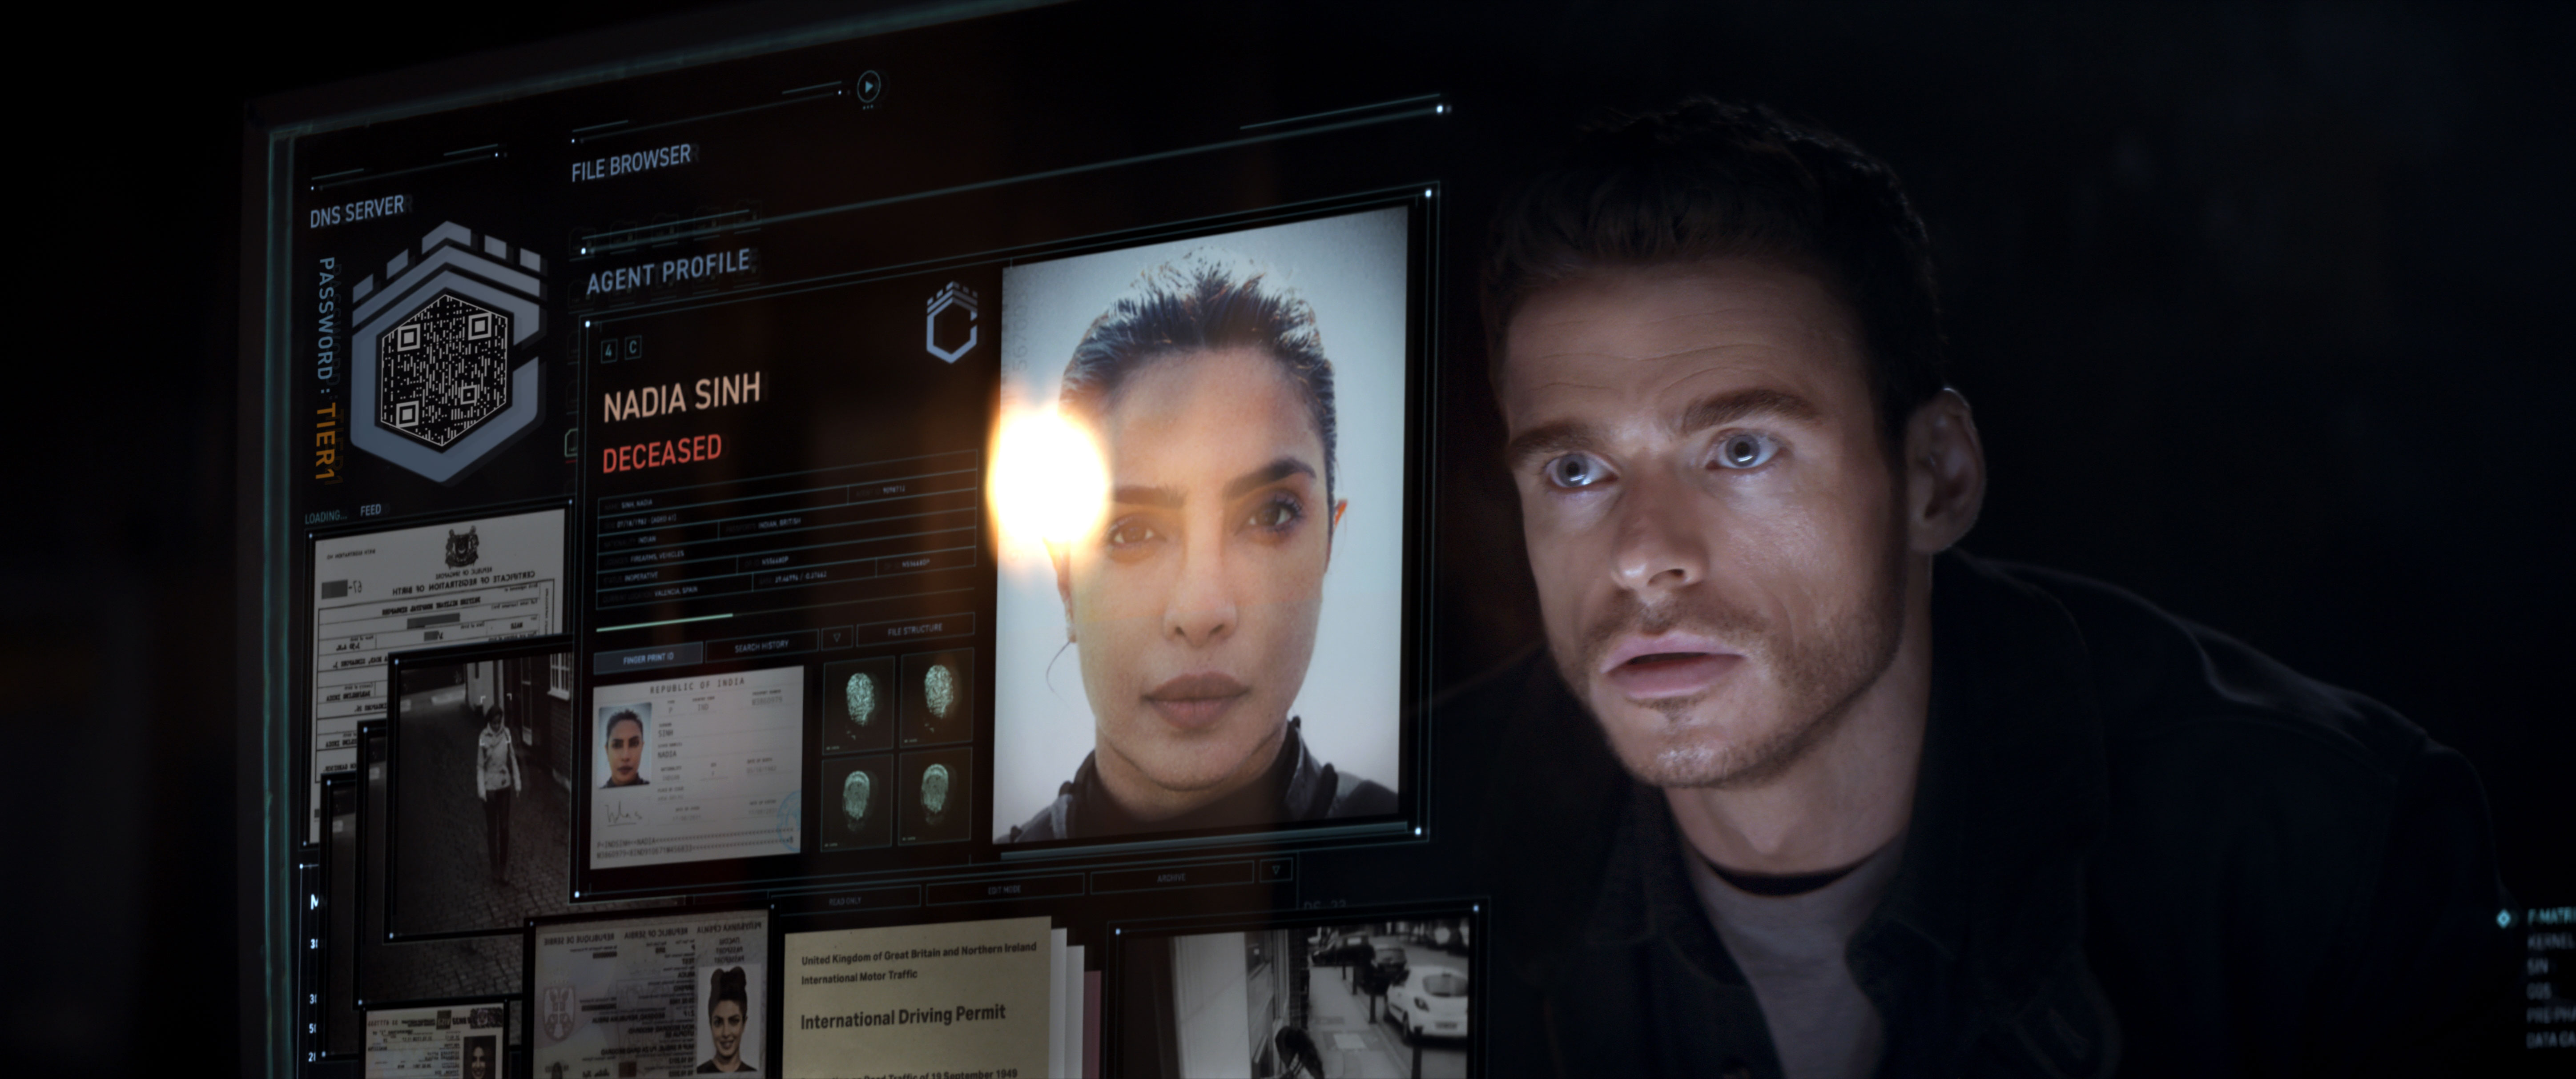 Richard Madden’s character looks at a holographic screen, on which a photograph of Priyanka Chopra Jonas’ character is visible.